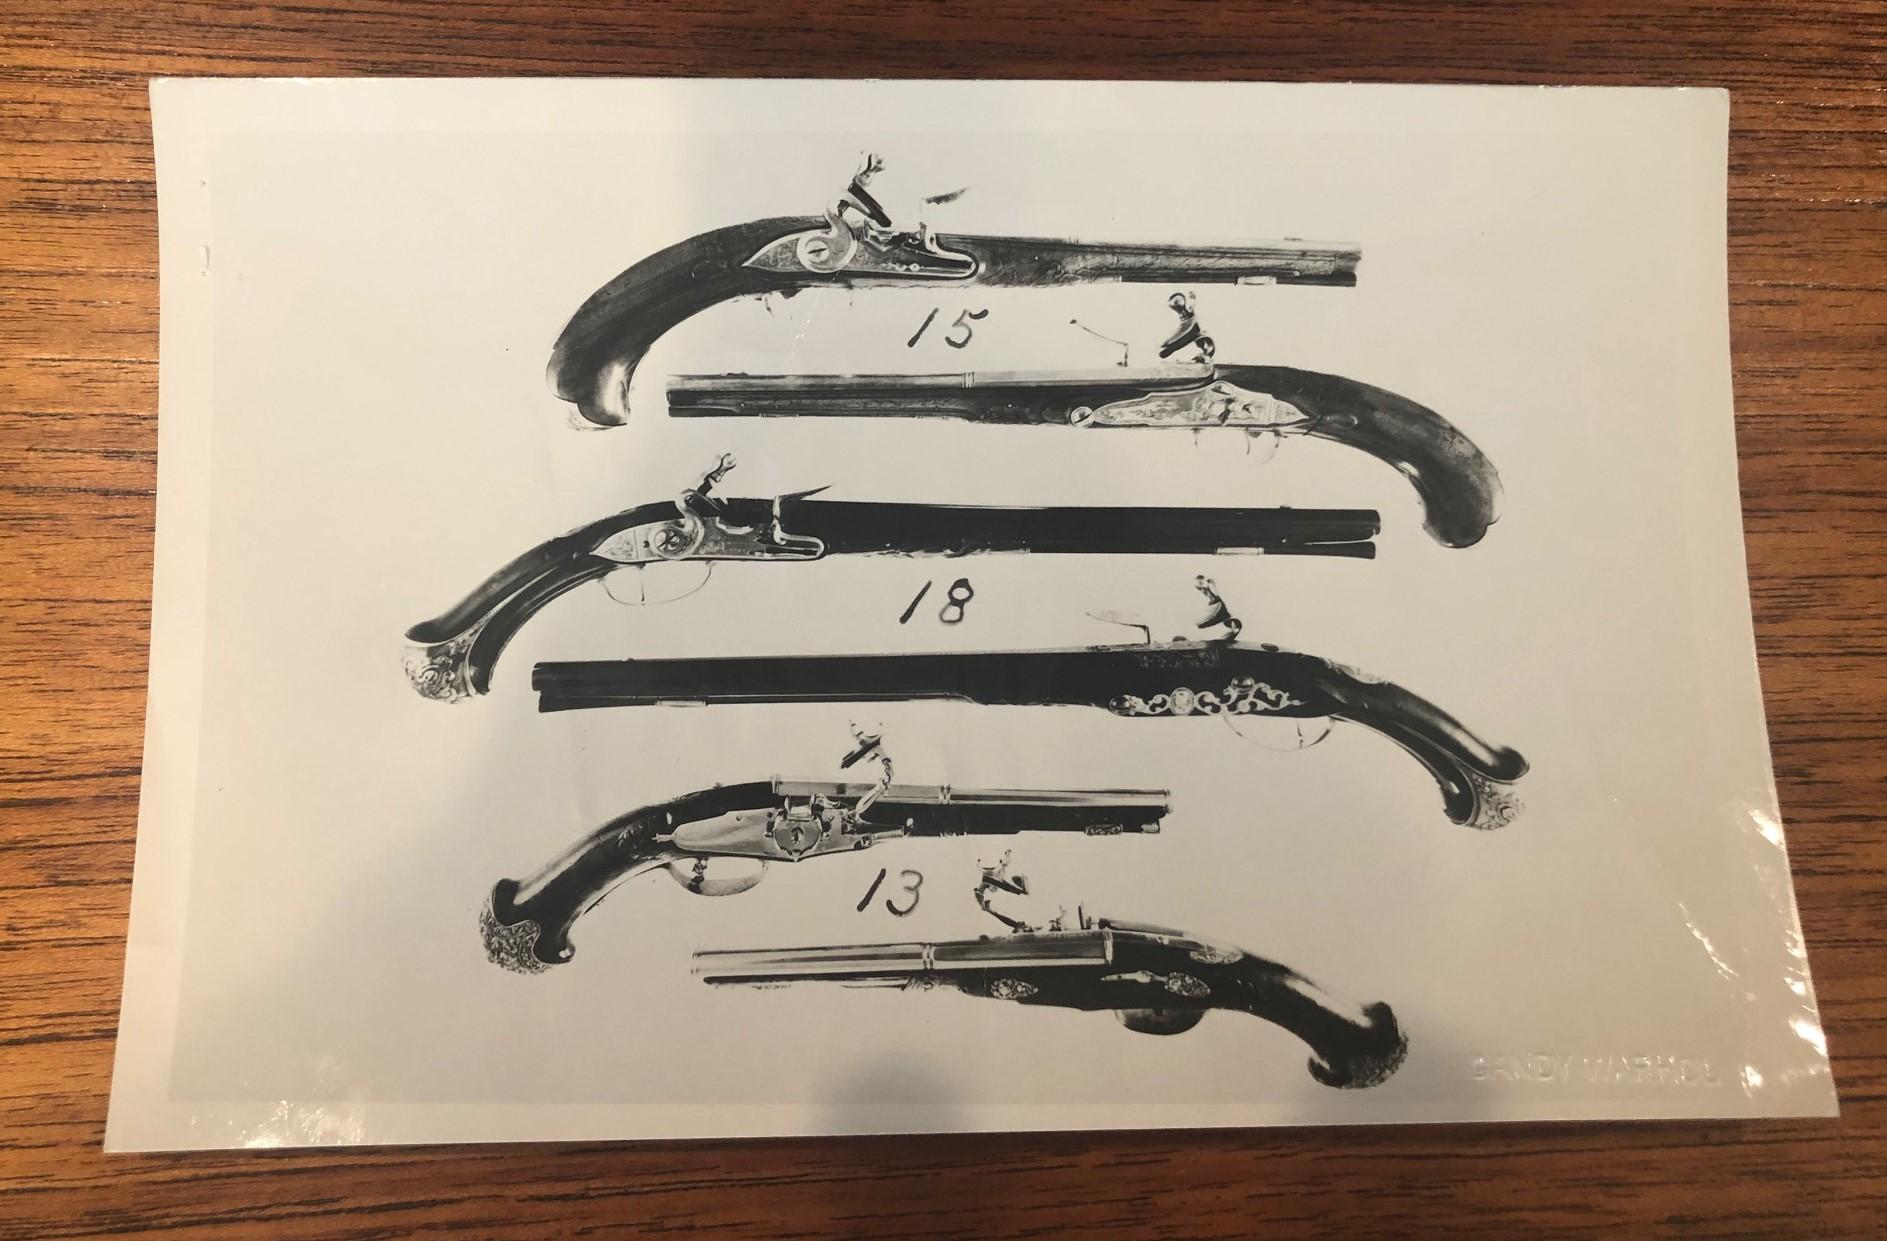 Andy Warhol antique guns photograph, circa 1970s. The photo is stamped in verso 